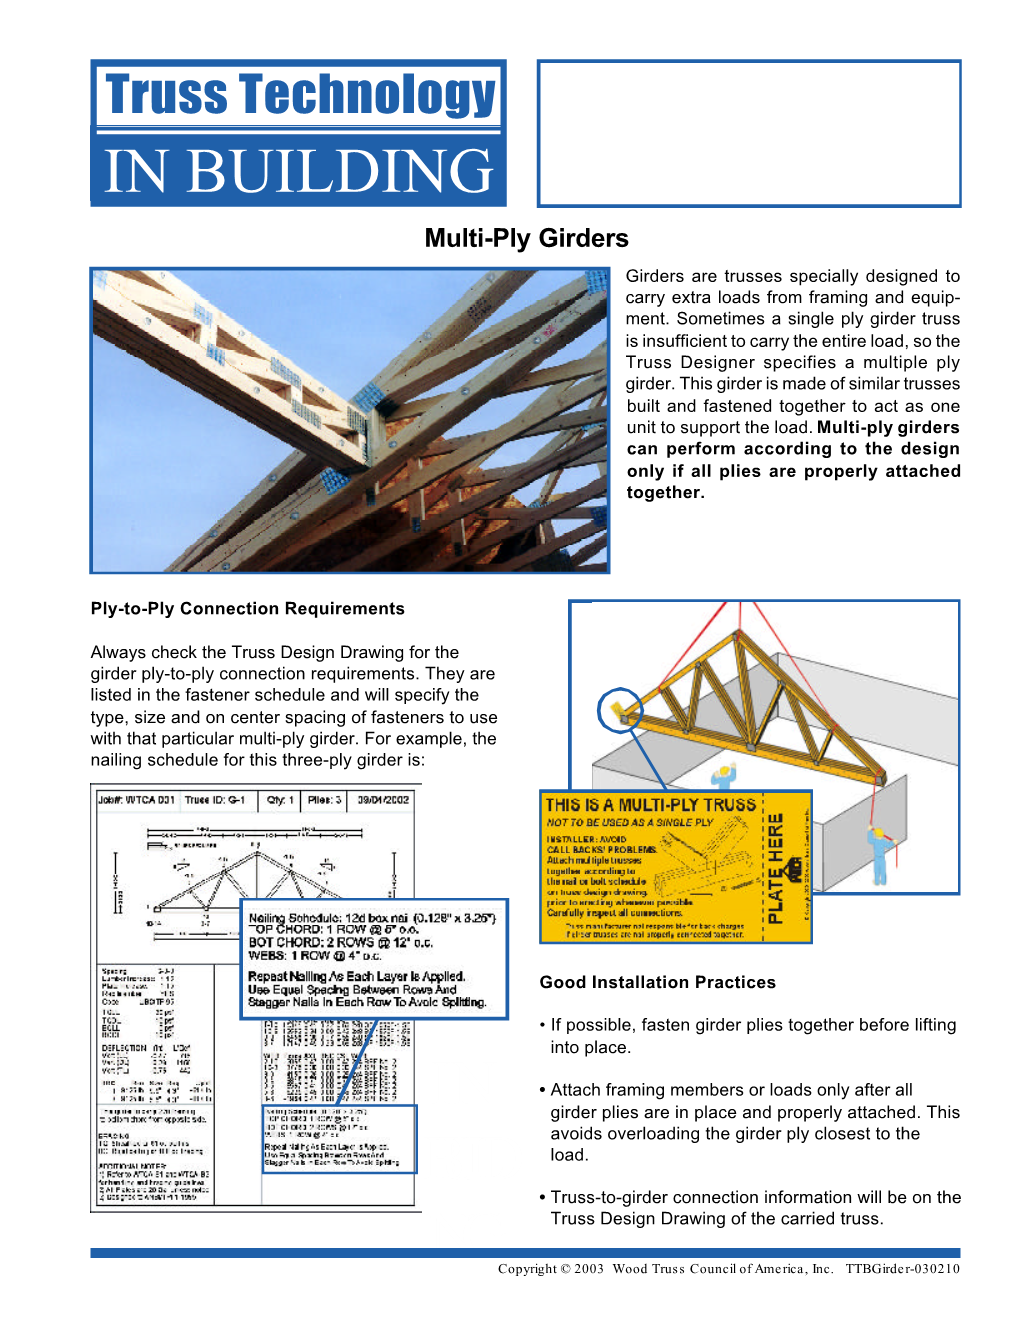 Multi-Ply Girders Girders Are Trusses Specially Designed to Carry Extra Loads from Framing and Equip- Ment